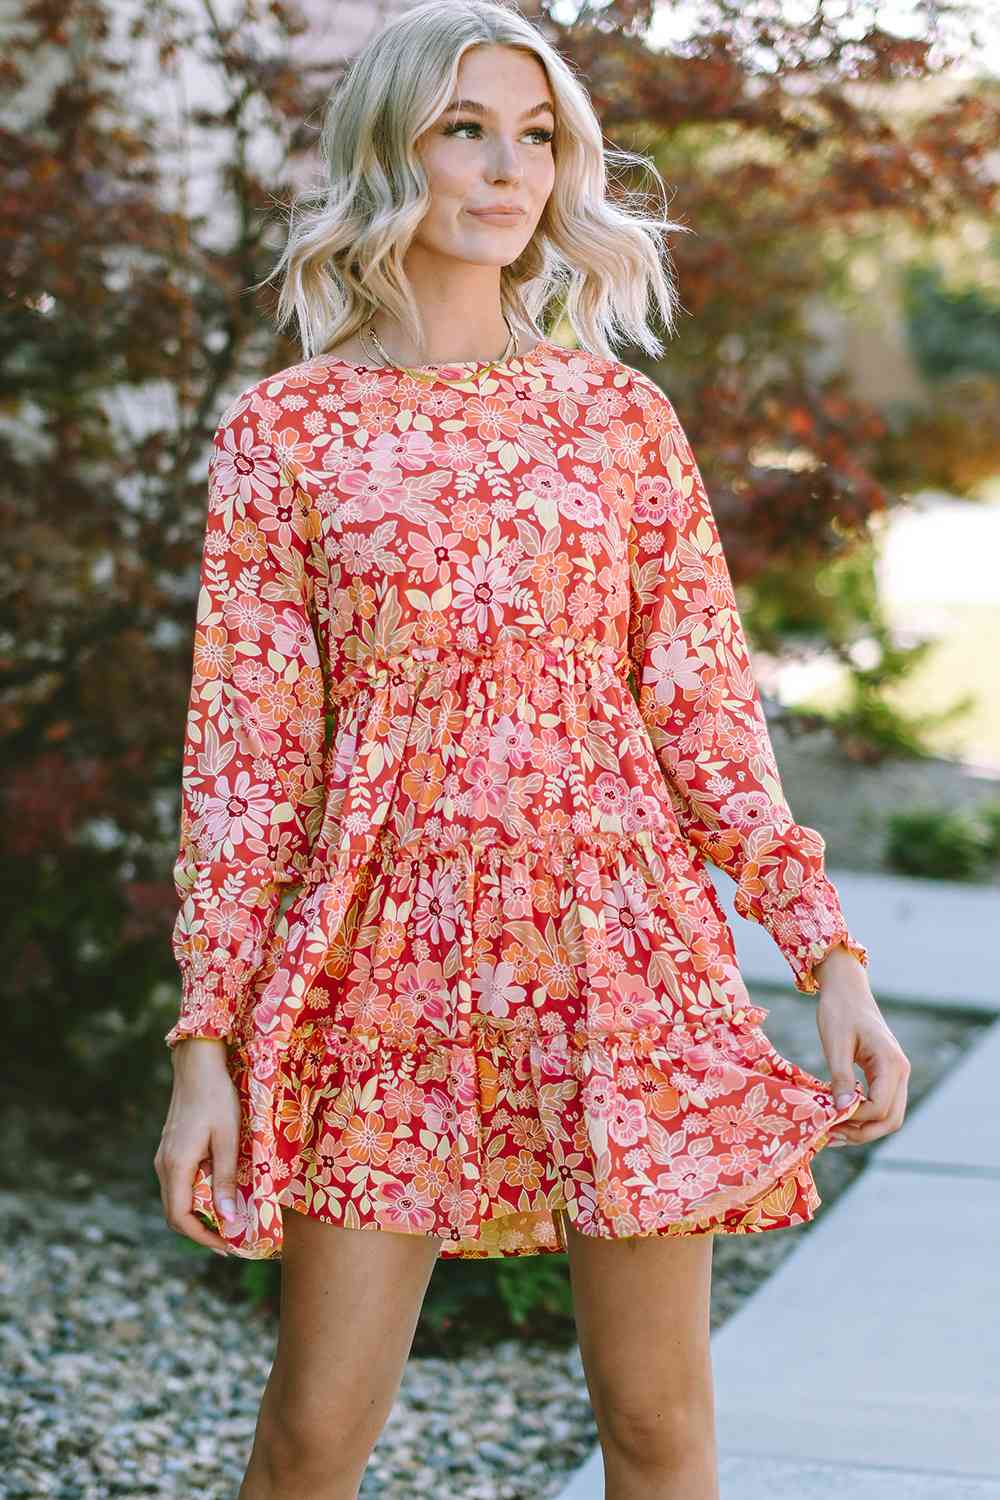 Floral Print Round Neck Long Sleeve Tiered Dress - Floral / S - All Dresses - Dresses - 1 - 2024